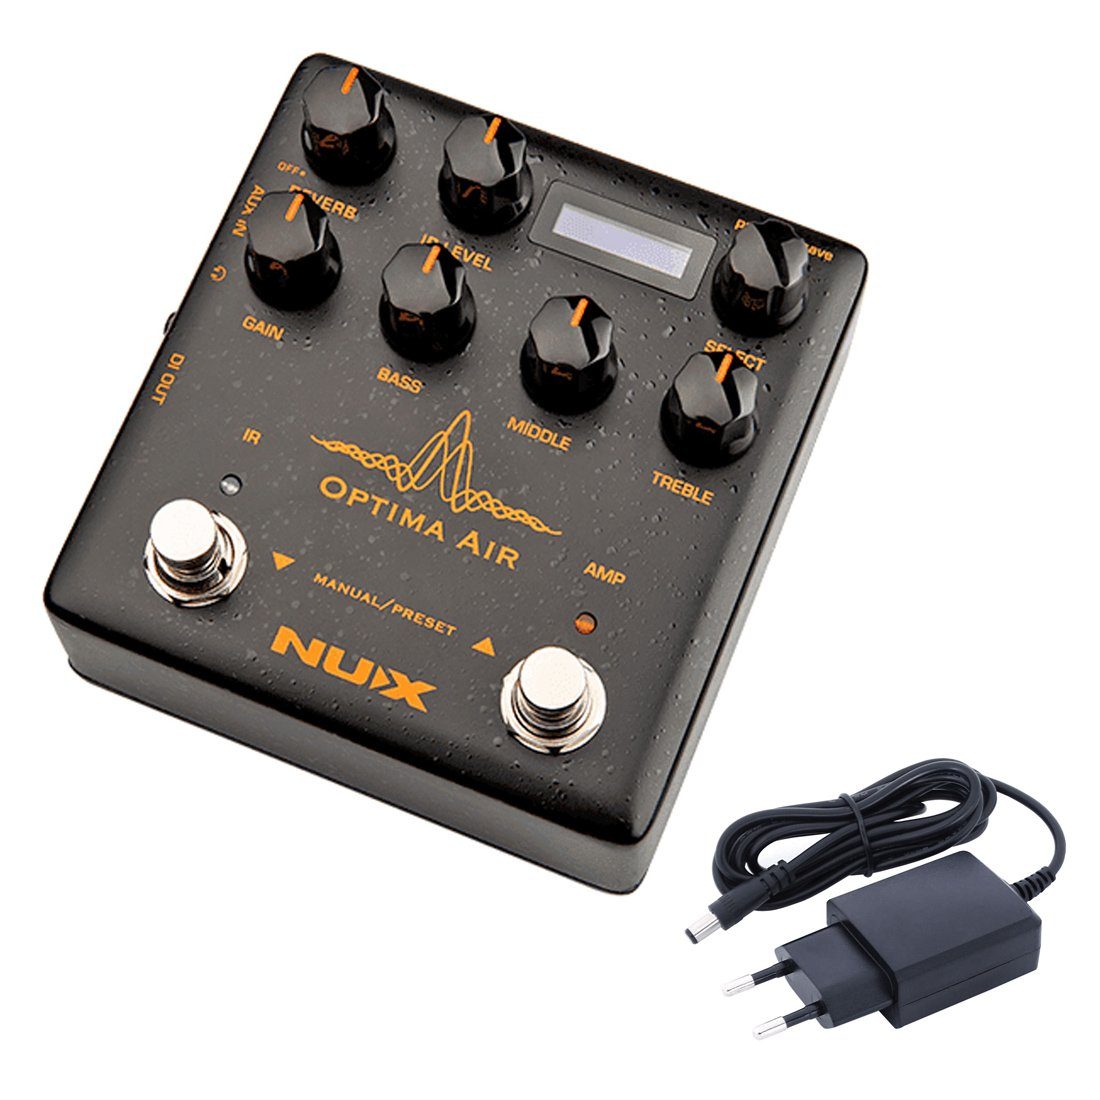 NUX Time Core Deluxe Multi Delay mit 9V Netzteil - keepdrum